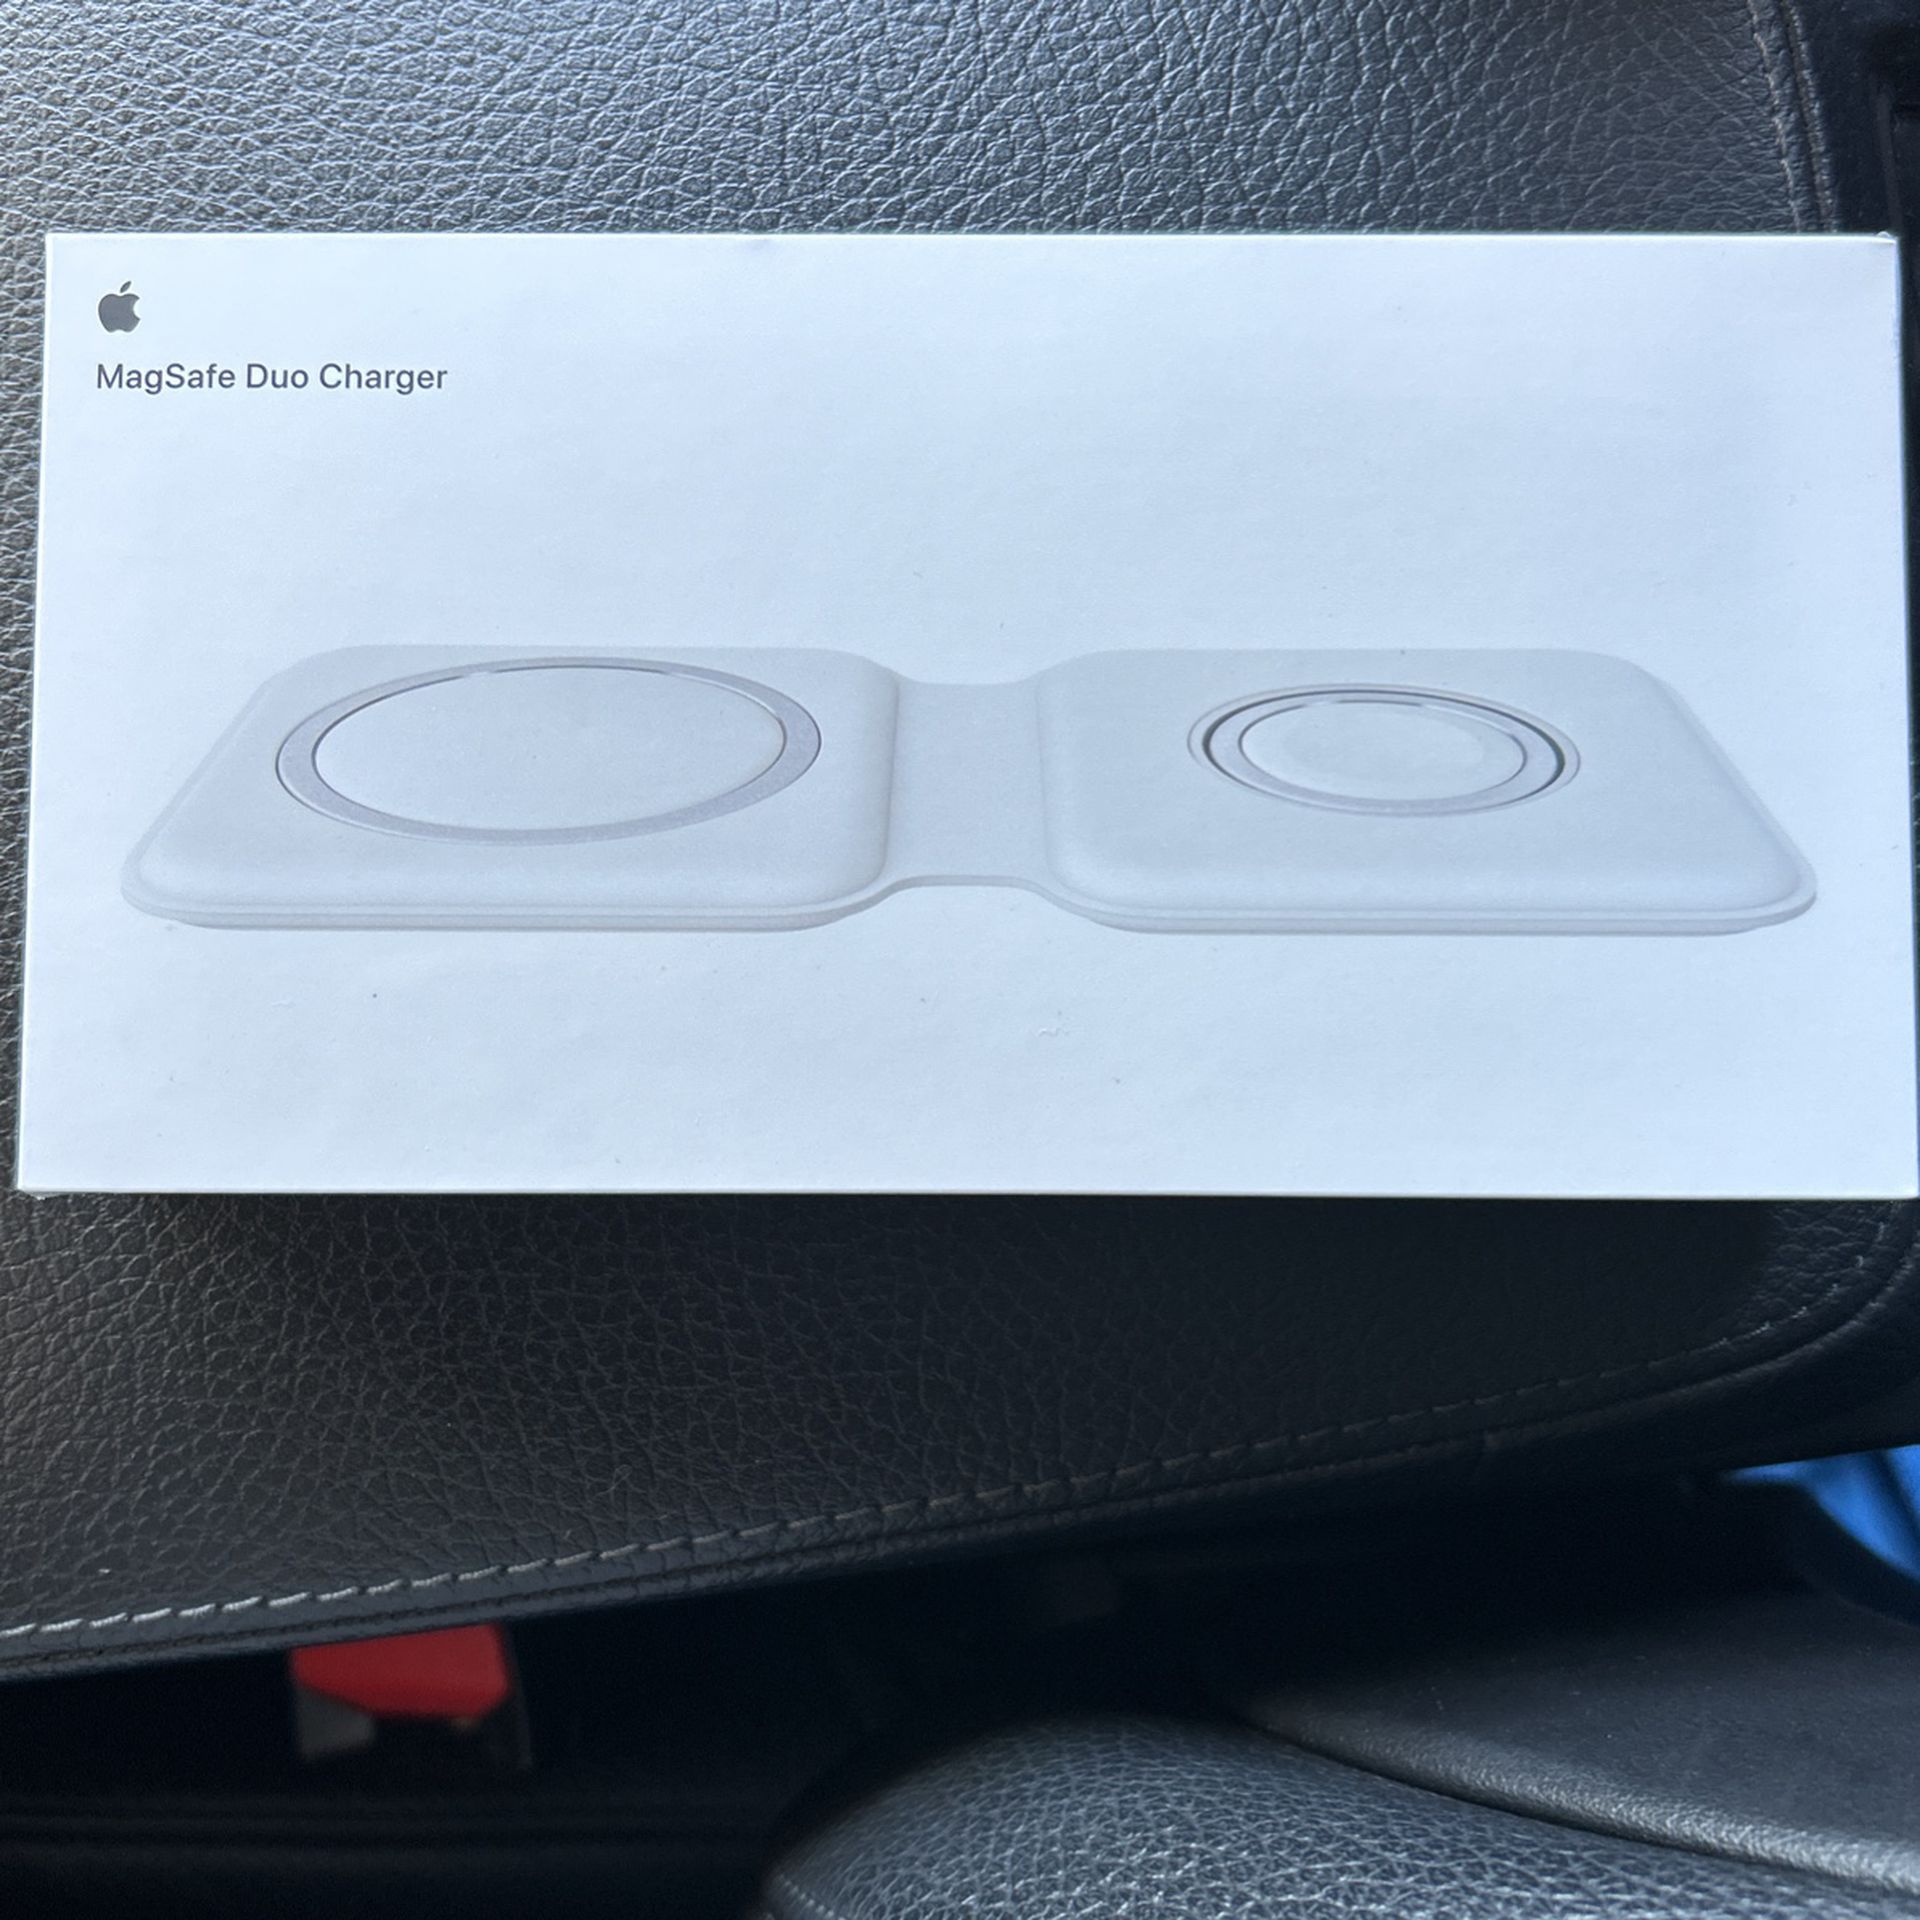 Apple MagSafe Duo Charger (Unopened Box)